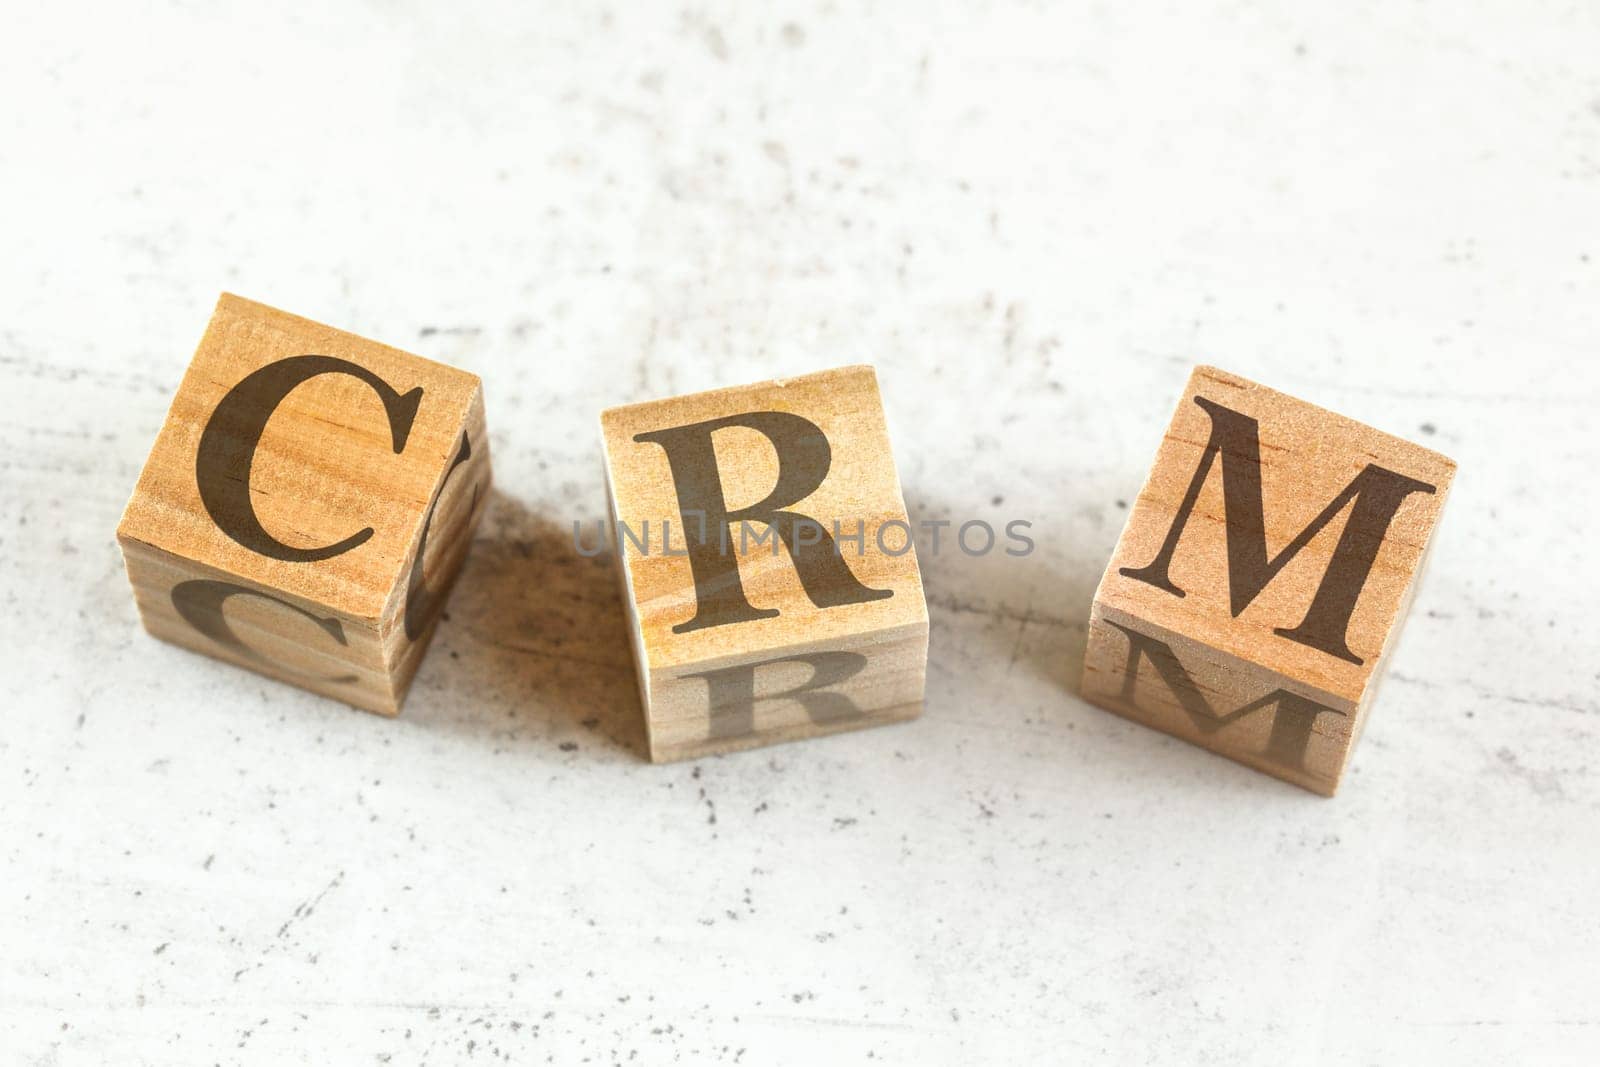 Three wooden cubes with letters CRM - stands for Customer relationship management - on white board. by Ivanko